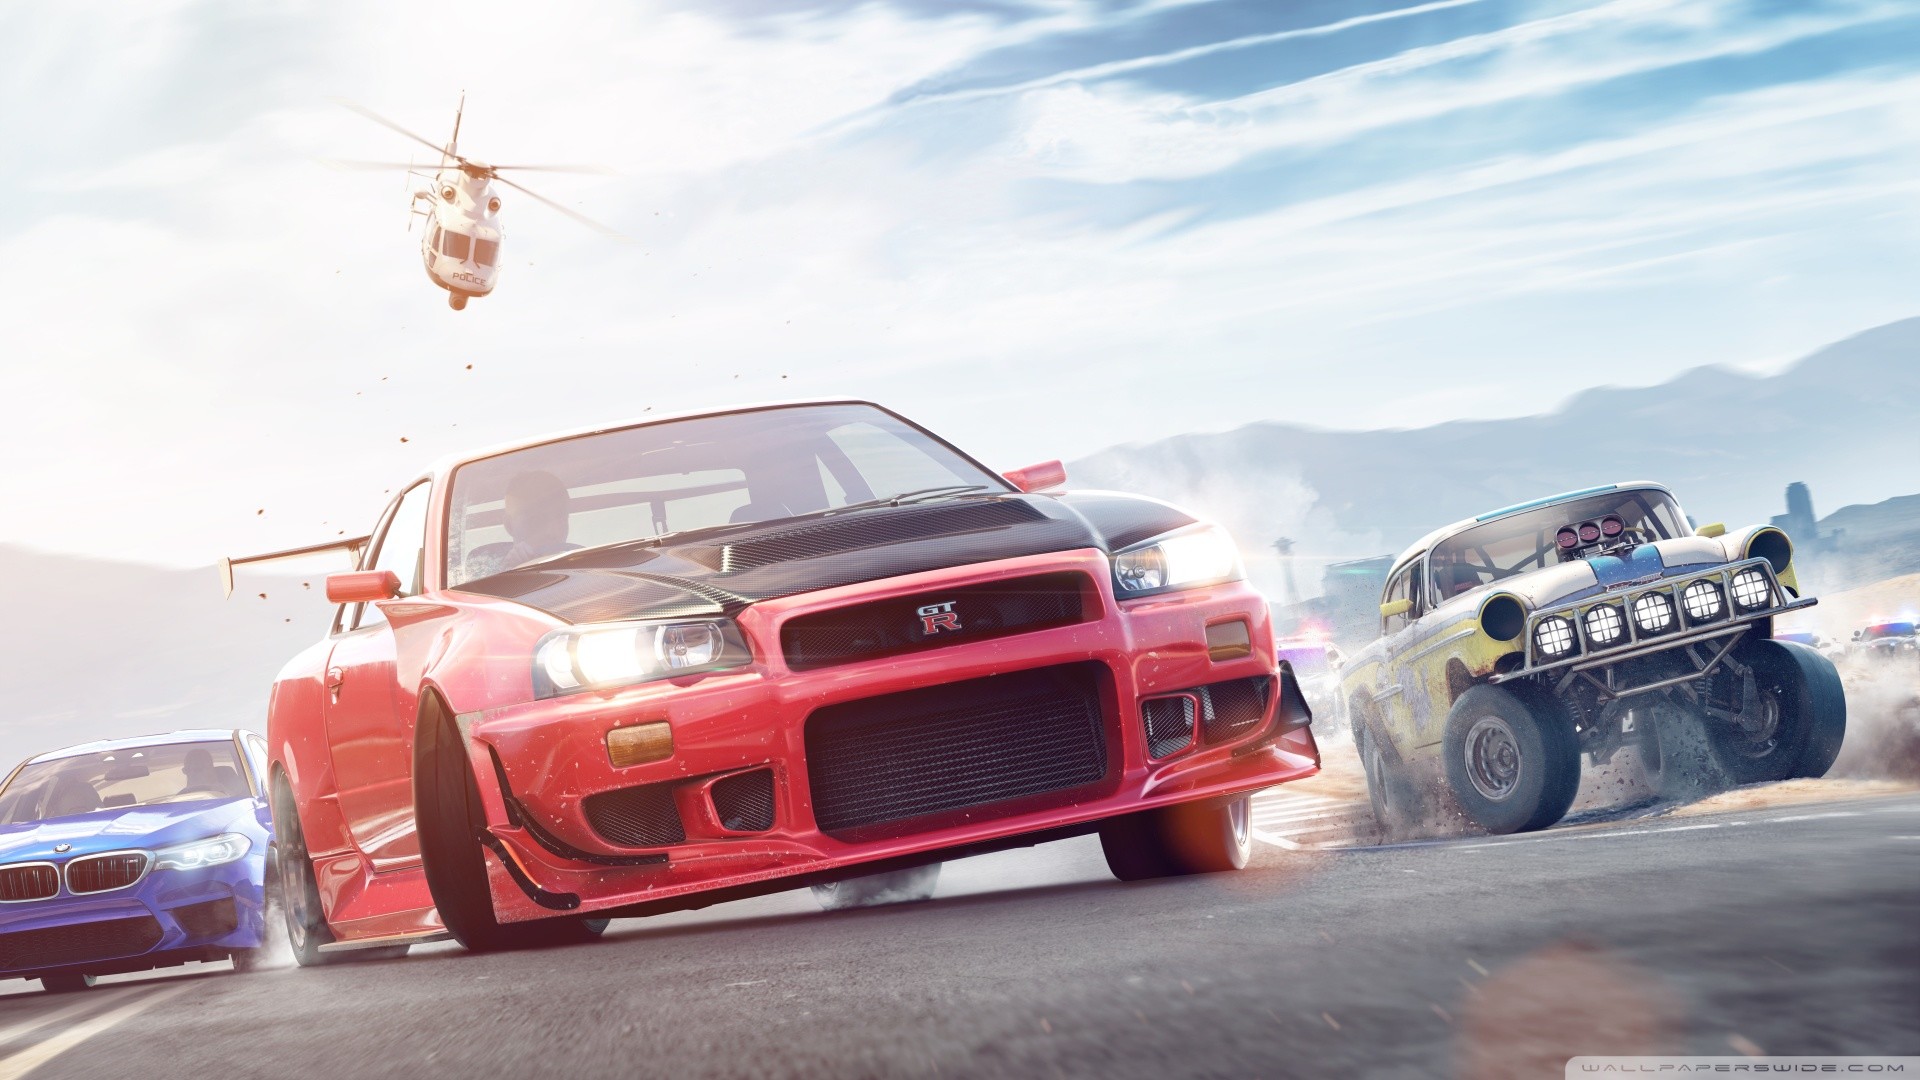 1920x1080 Need For Speed Payback no title FULLHD HD Wide Wallpaper for Widescreen